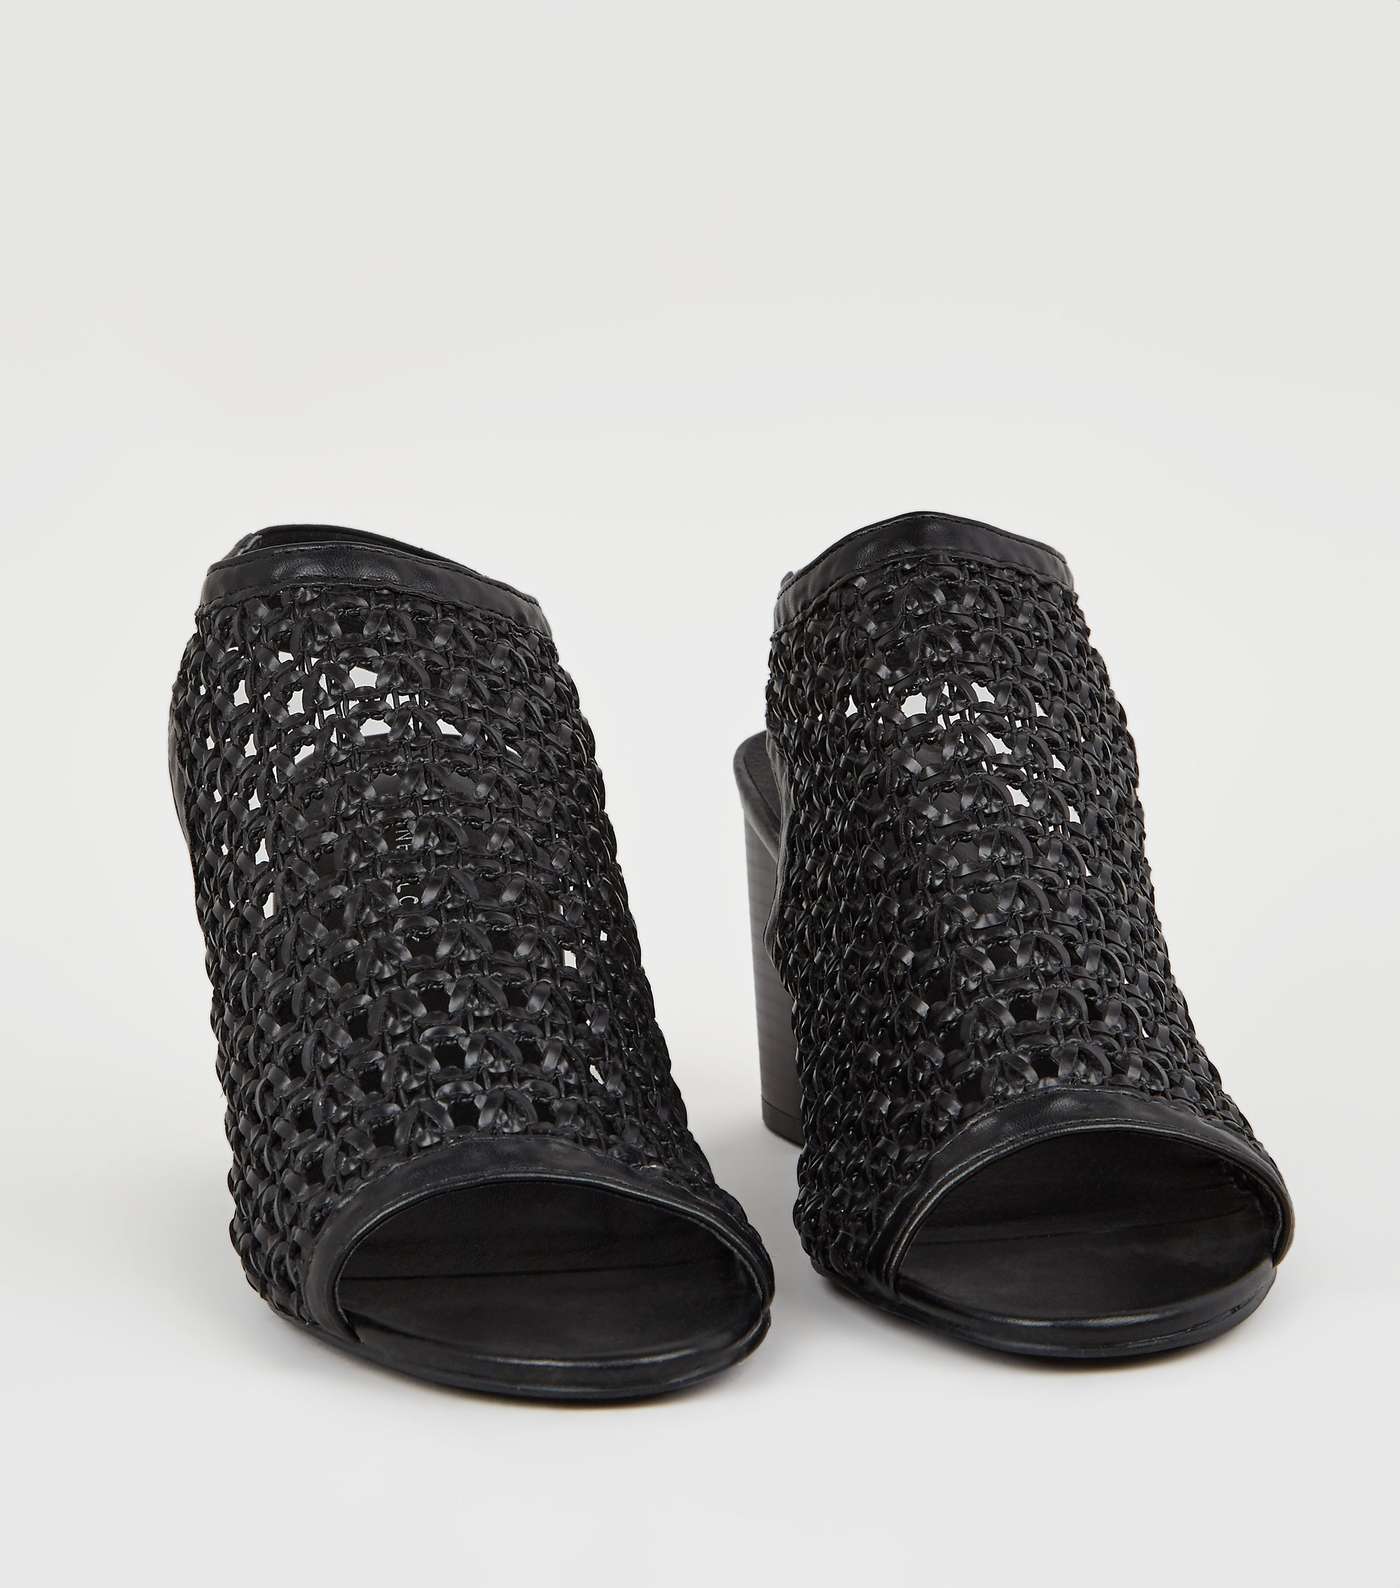 Wide Fit Black Leather-Look Woven Shoe Boots Image 4